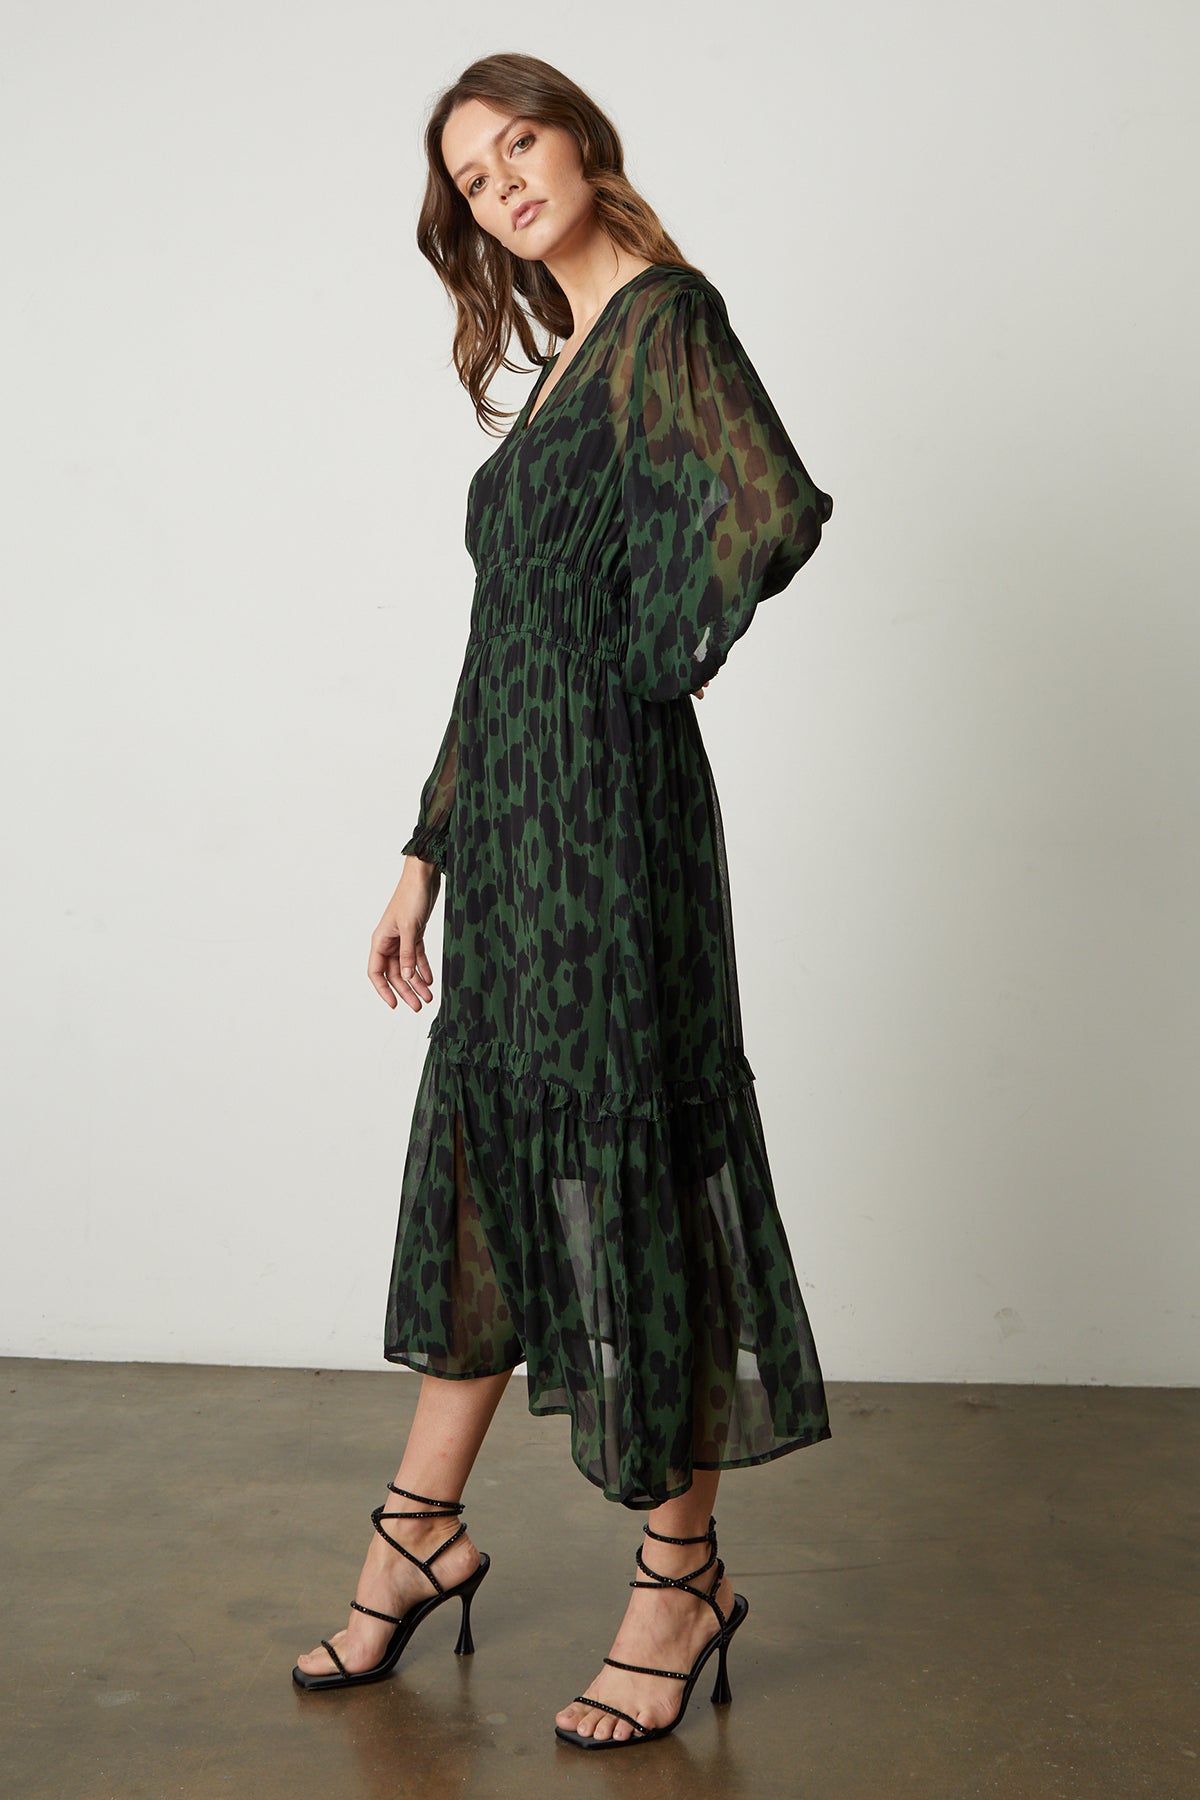 Kendra Printed Maxi Dress in green and black airbrush print with black sandals full length side & front-25669297537217